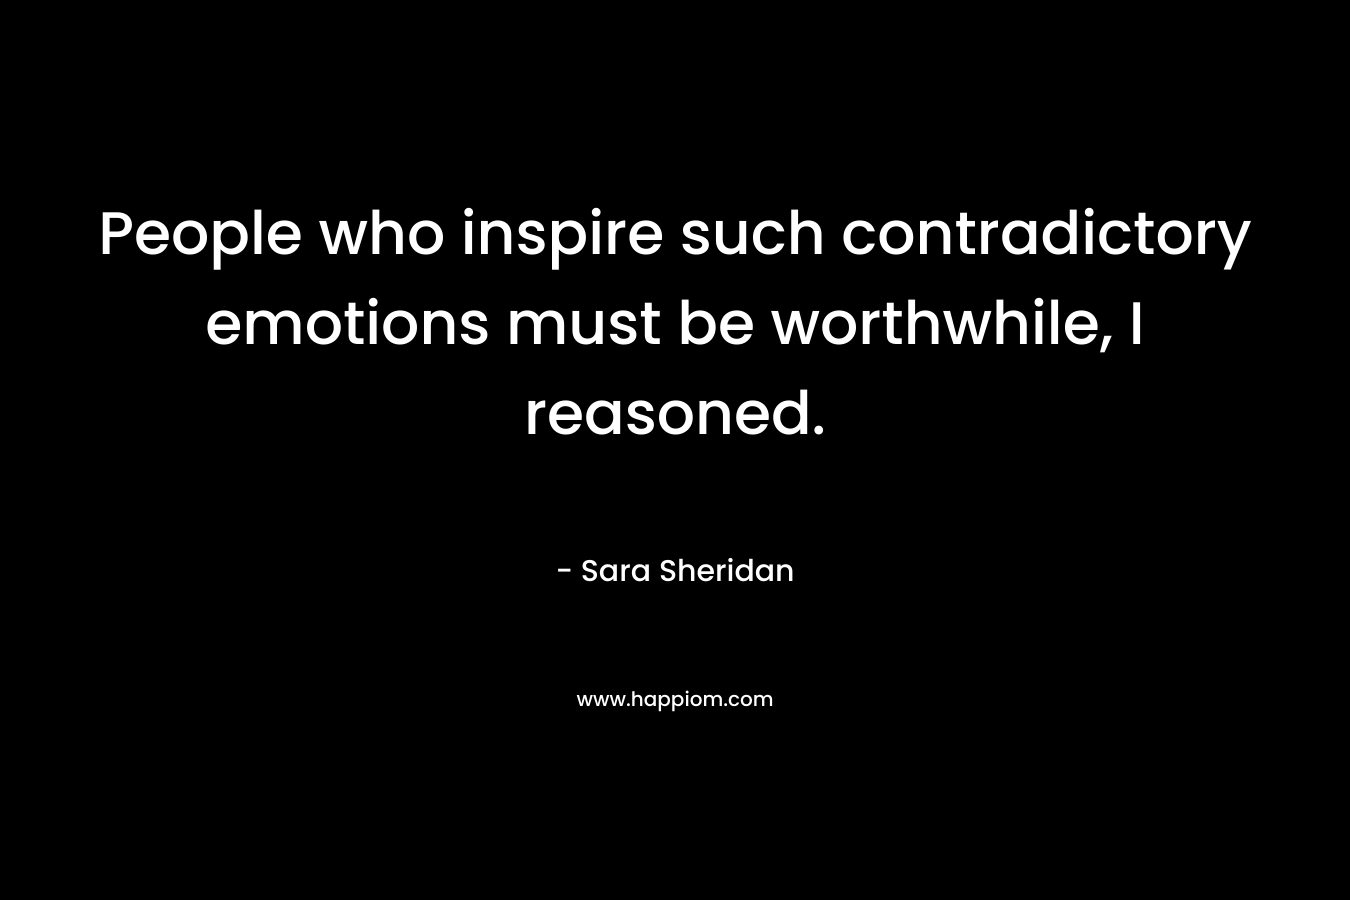 People who inspire such contradictory emotions must be worthwhile, I reasoned.